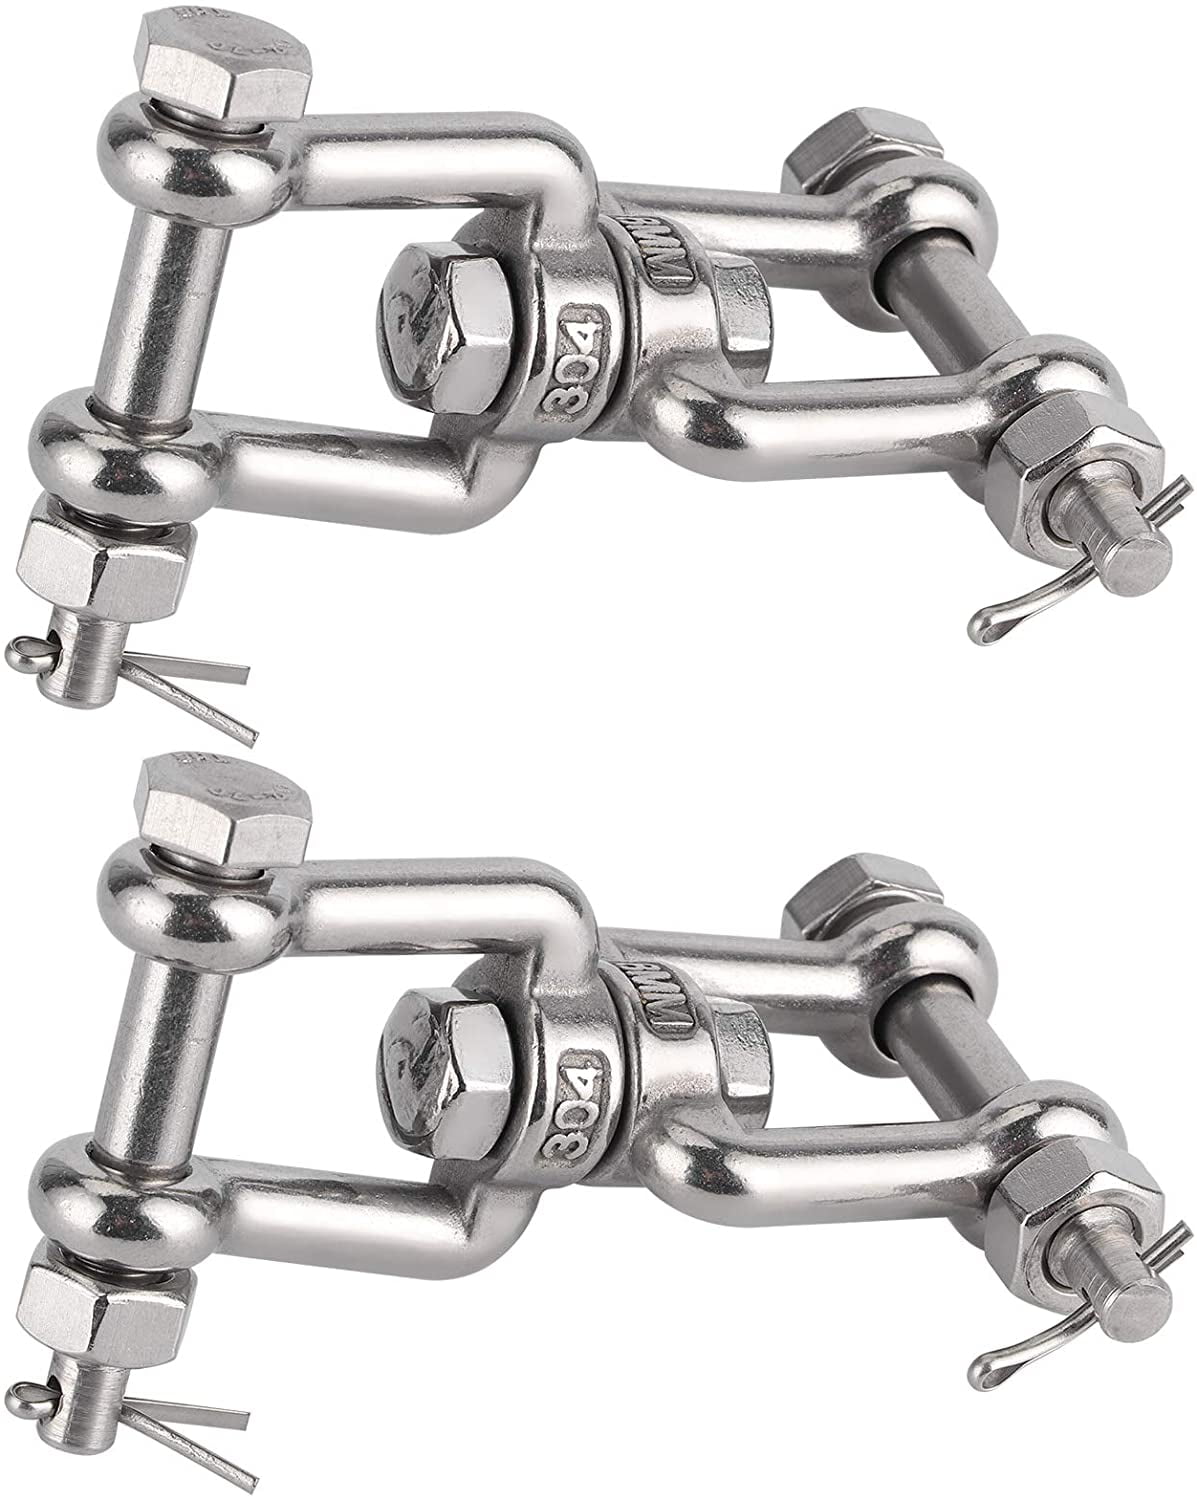 Anchor Swivel Chain Connector Marine Grade Double Shackle 2 PCS Boat Anchors 304 Stainless Anchor Swivel Shackle 